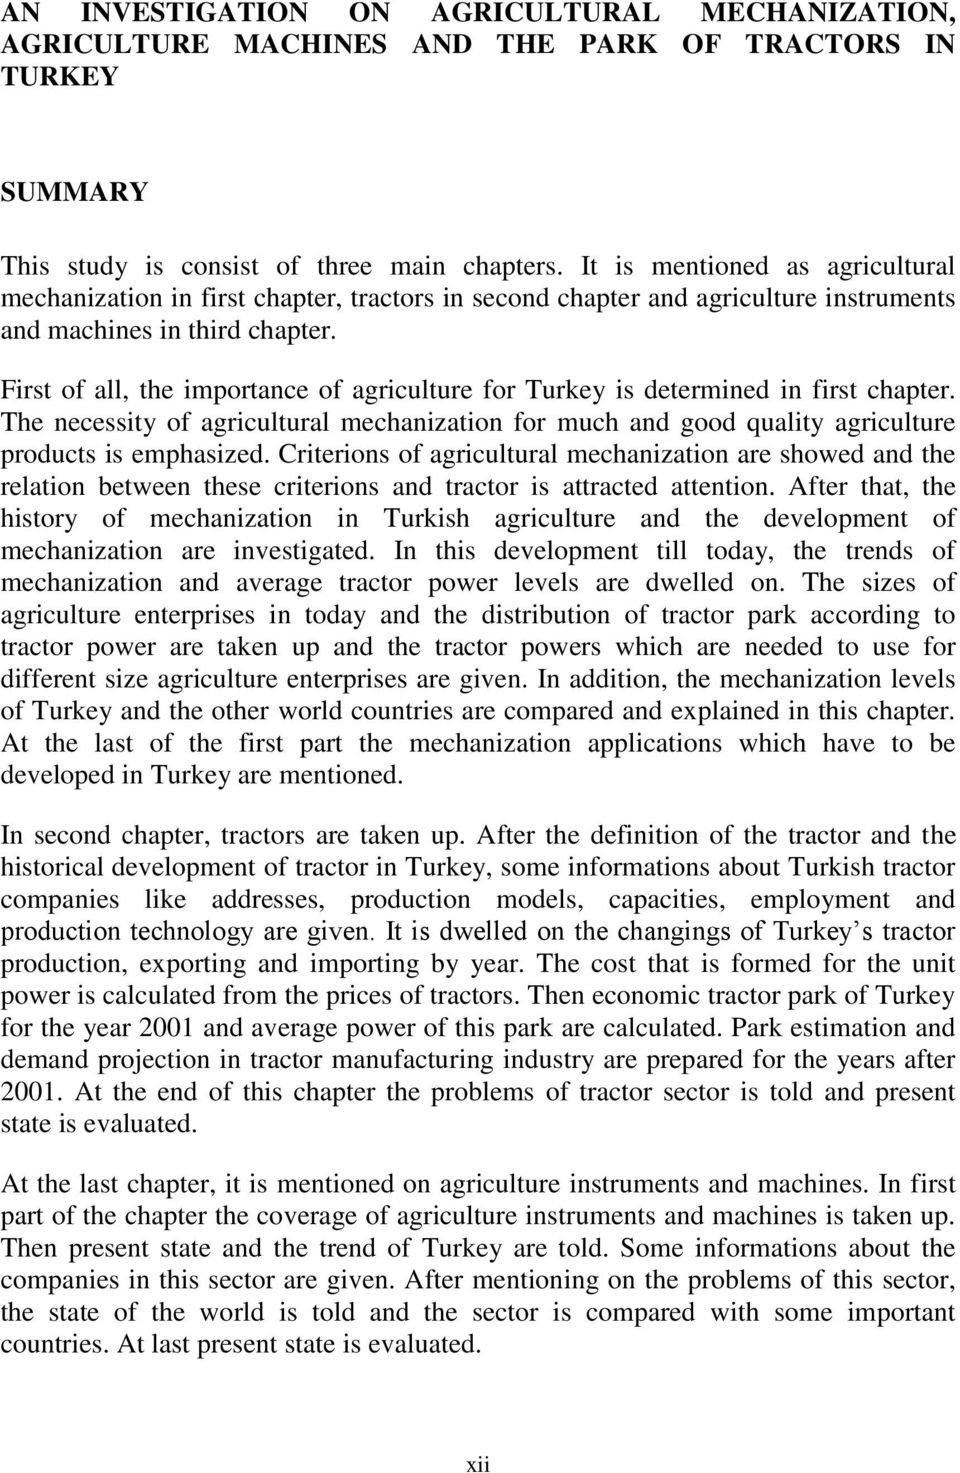 First of all, the importance of agriculture for Turkey is determined in first chapter. The necessity of agricultural mechanization for much and good quality agriculture products is emphasized.